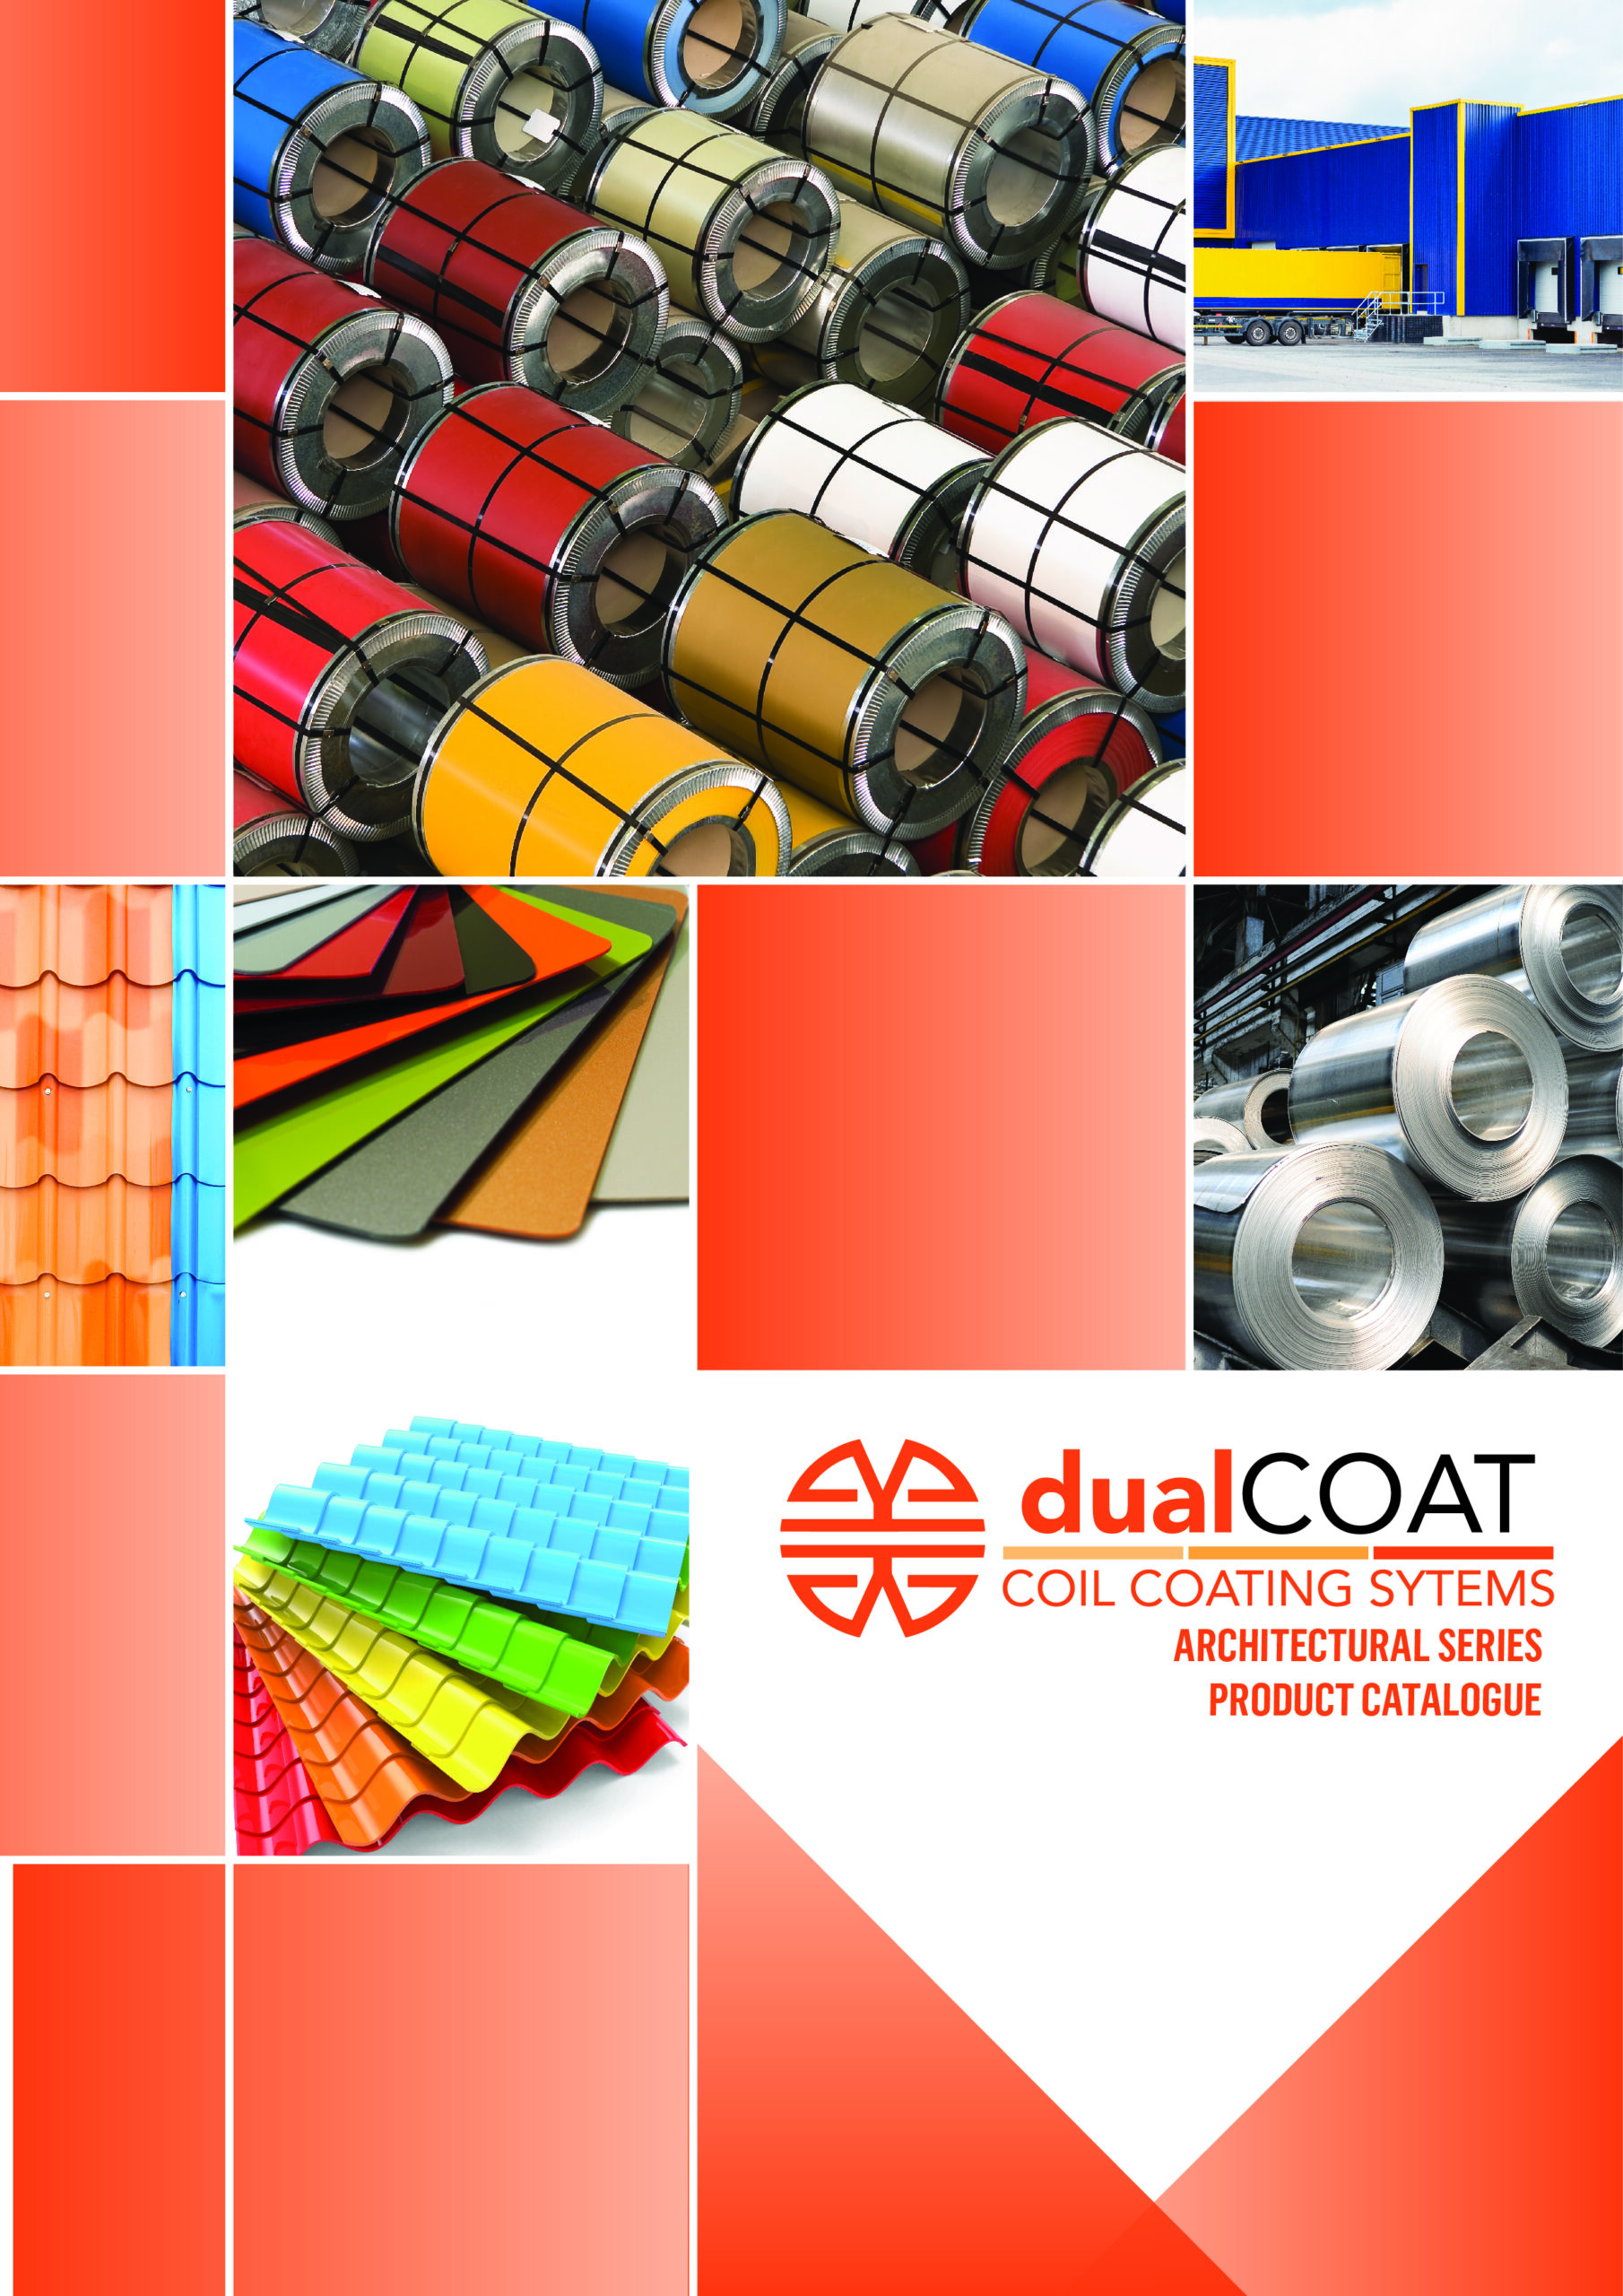 dualCOAT coil coating systems